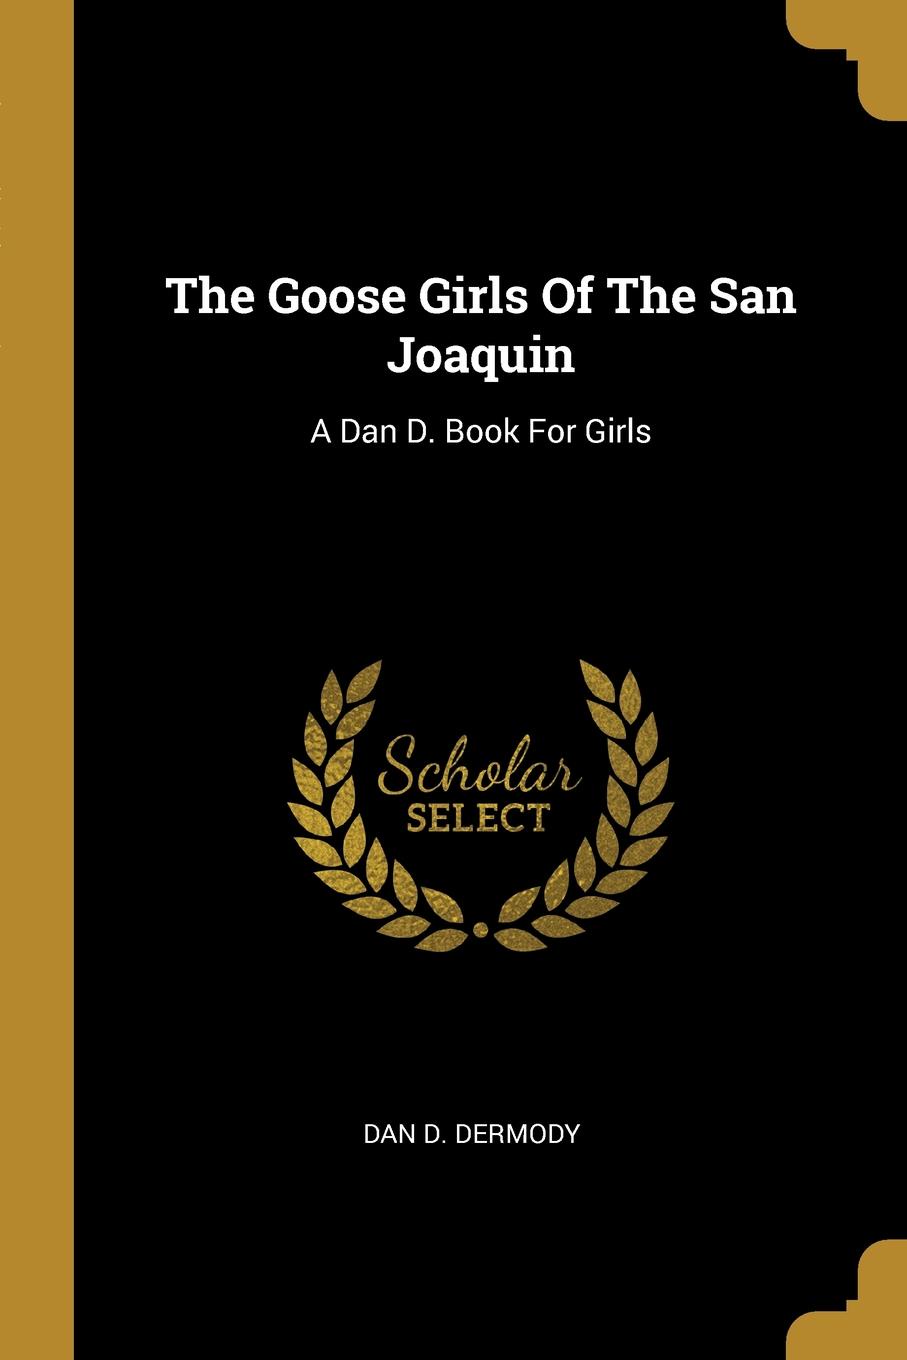 The Goose Girls Of The San Joaquin. A Dan D. Book For Girls